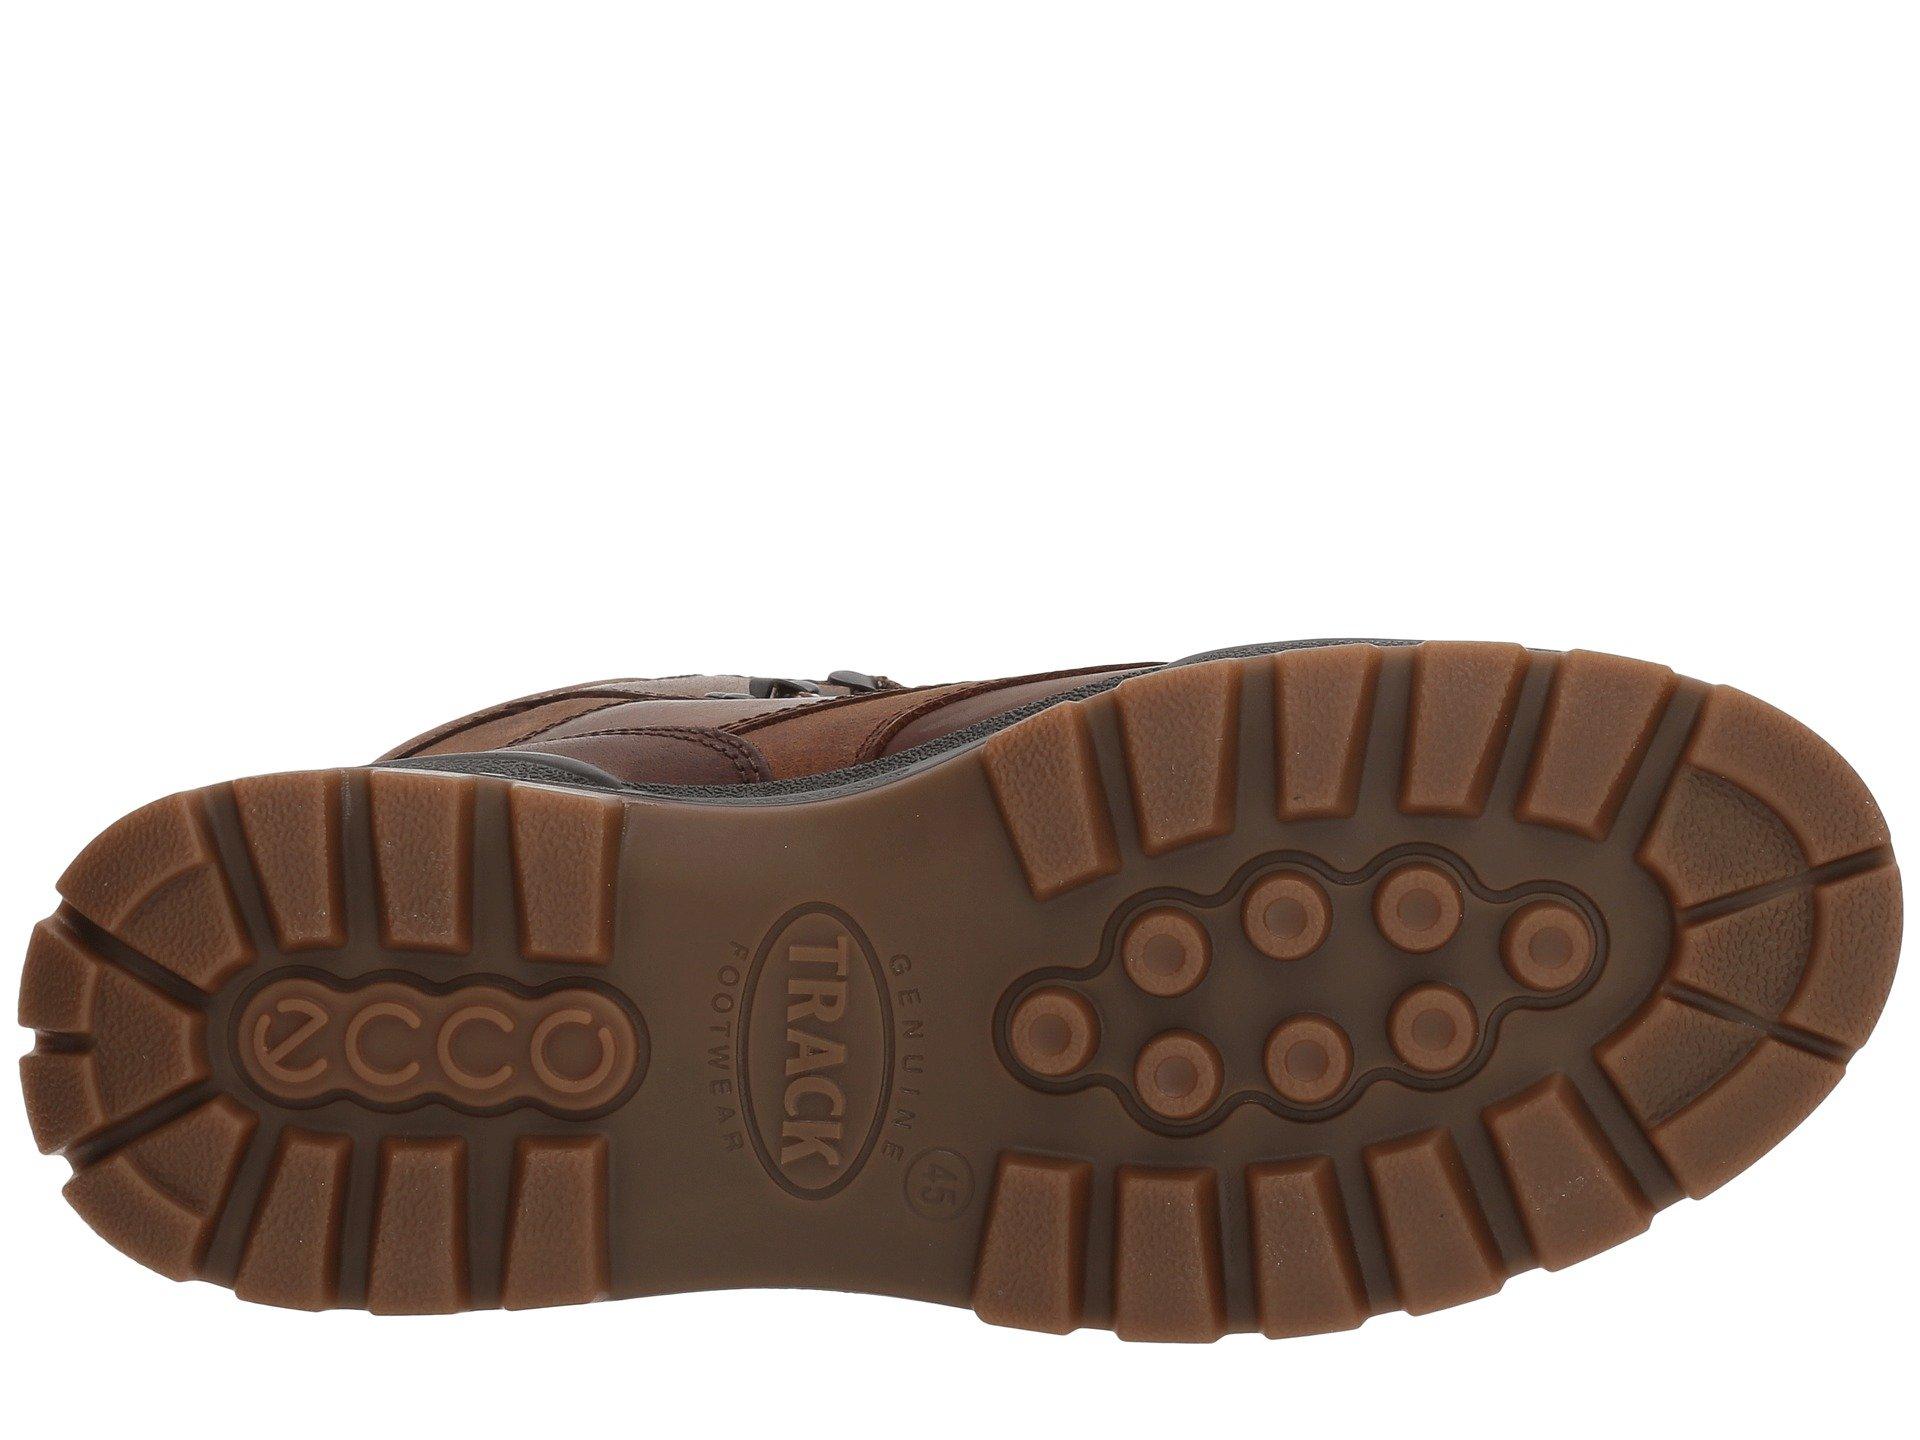 Ecco 25 Premium High in Cocoa Brown/Camel (Brown) for Men - Lyst